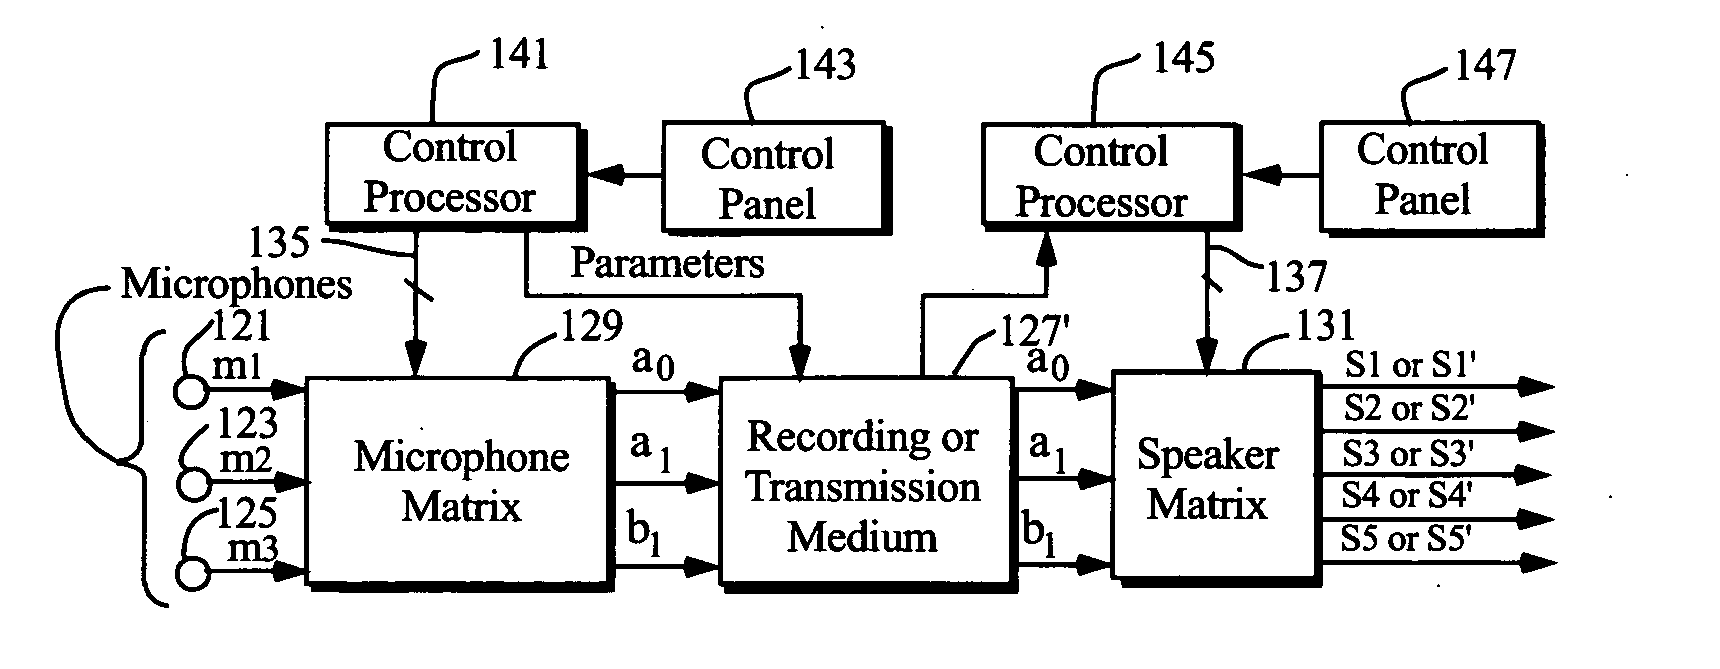 Multi-channel surround sound mastering and reproduction techniques that preserve spatial harmonics in three dimensions